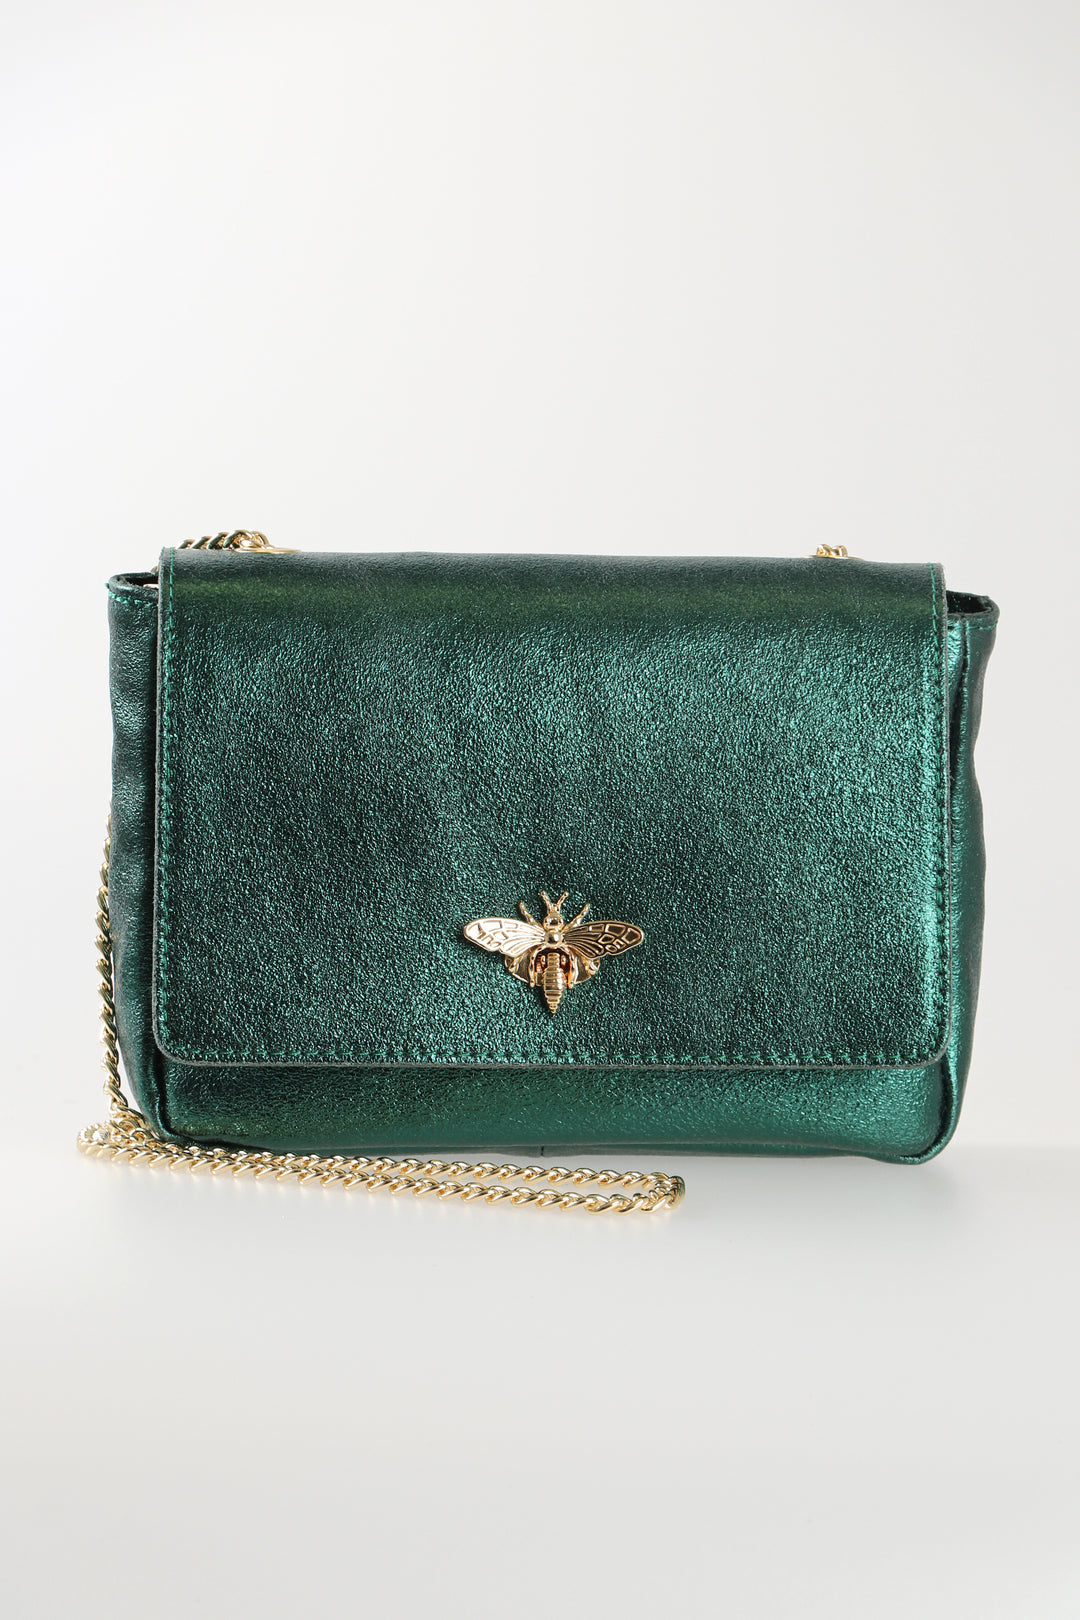 Emerald Green Genuine Italian Leather Bag with Bee Emblem and Chain Strap